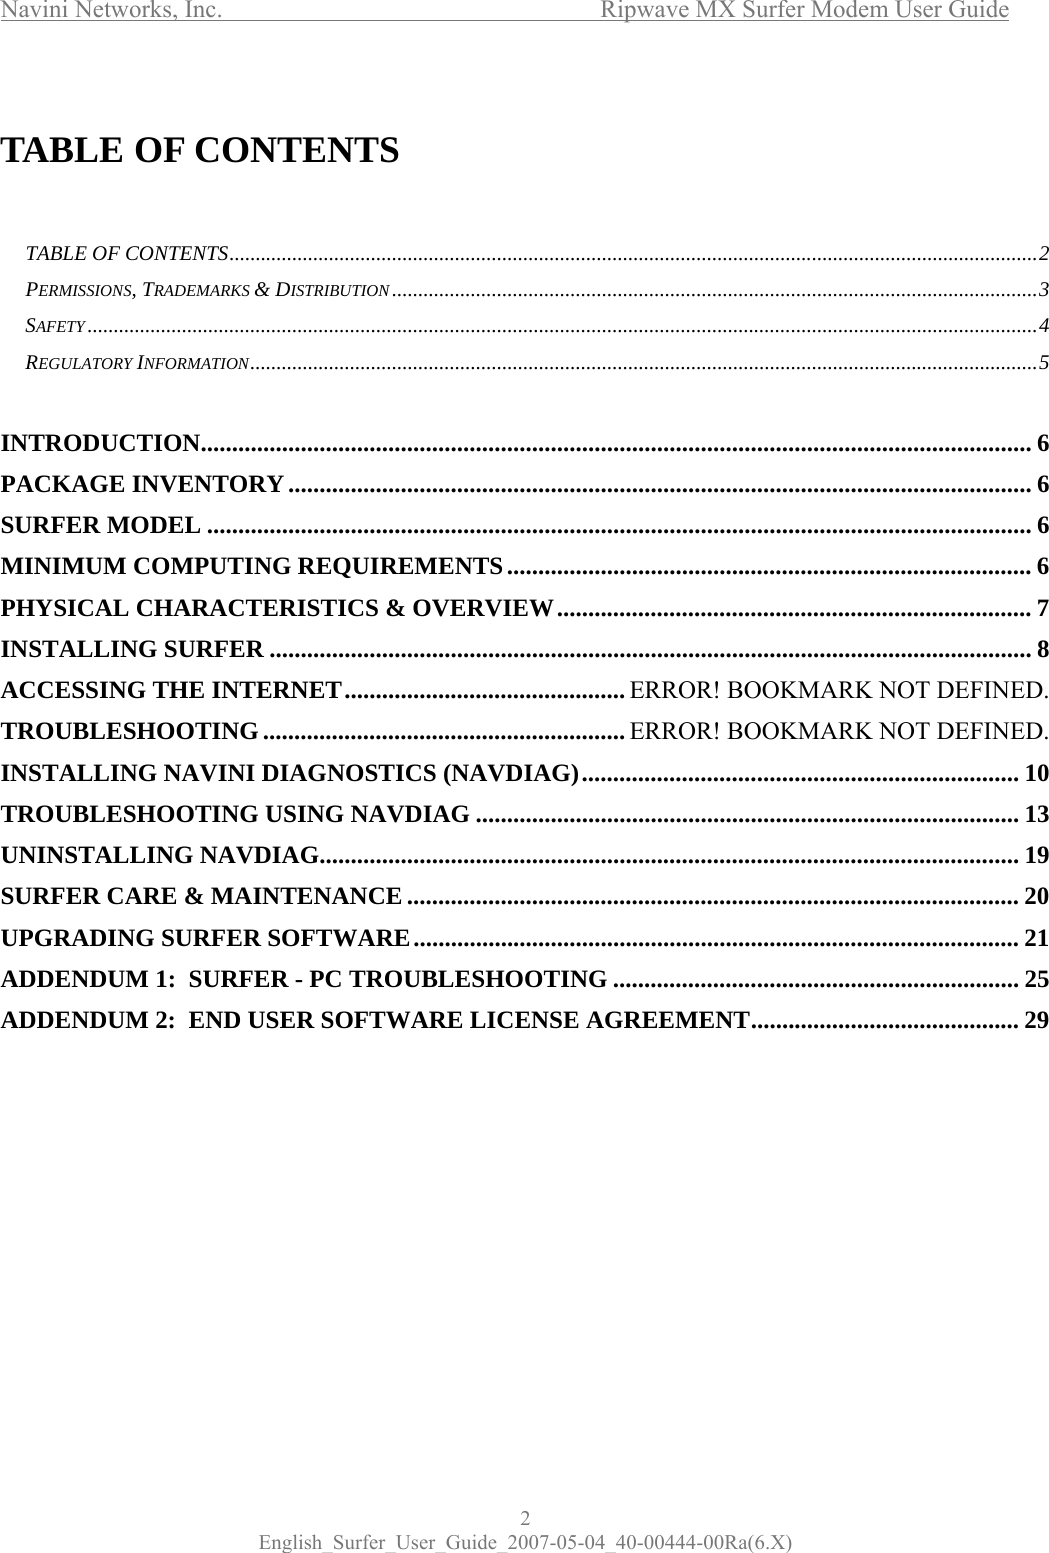 Navini Networks, Inc.           Ripwave MX Surfer Modem User Guide 2 English_Surfer_User_Guide_2007-05-04_40-00444-00Ra(6.X)  TABLE OF CONTENTS   TABLE OF CONTENTS..........................................................................................................................................................2 PERMISSIONS, TRADEMARKS &amp; DISTRIBUTION...........................................................................................................................3 SAFETY.....................................................................................................................................................................................4 REGULATORY INFORMATION......................................................................................................................................................5  INTRODUCTION..................................................................................................................................... 6 PACKAGE INVENTORY....................................................................................................................... 6 SURFER MODEL .................................................................................................................................... 6 MINIMUM COMPUTING REQUIREMENTS.................................................................................... 6 PHYSICAL CHARACTERISTICS &amp; OVERVIEW............................................................................ 7 INSTALLING SURFER .......................................................................................................................... 8 ACCESSING THE INTERNET............................................. ERROR! BOOKMARK NOT DEFINED. TROUBLESHOOTING.......................................................... ERROR! BOOKMARK NOT DEFINED. INSTALLING NAVINI DIAGNOSTICS (NAVDIAG)...................................................................... 10 TROUBLESHOOTING USING NAVDIAG ....................................................................................... 13 UNINSTALLING NAVDIAG................................................................................................................ 19 SURFER CARE &amp; MAINTENANCE .................................................................................................. 20 UPGRADING SURFER SOFTWARE................................................................................................. 21 ADDENDUM 1:  SURFER - PC TROUBLESHOOTING ................................................................. 25 ADDENDUM 2:  END USER SOFTWARE LICENSE AGREEMENT........................................... 29  